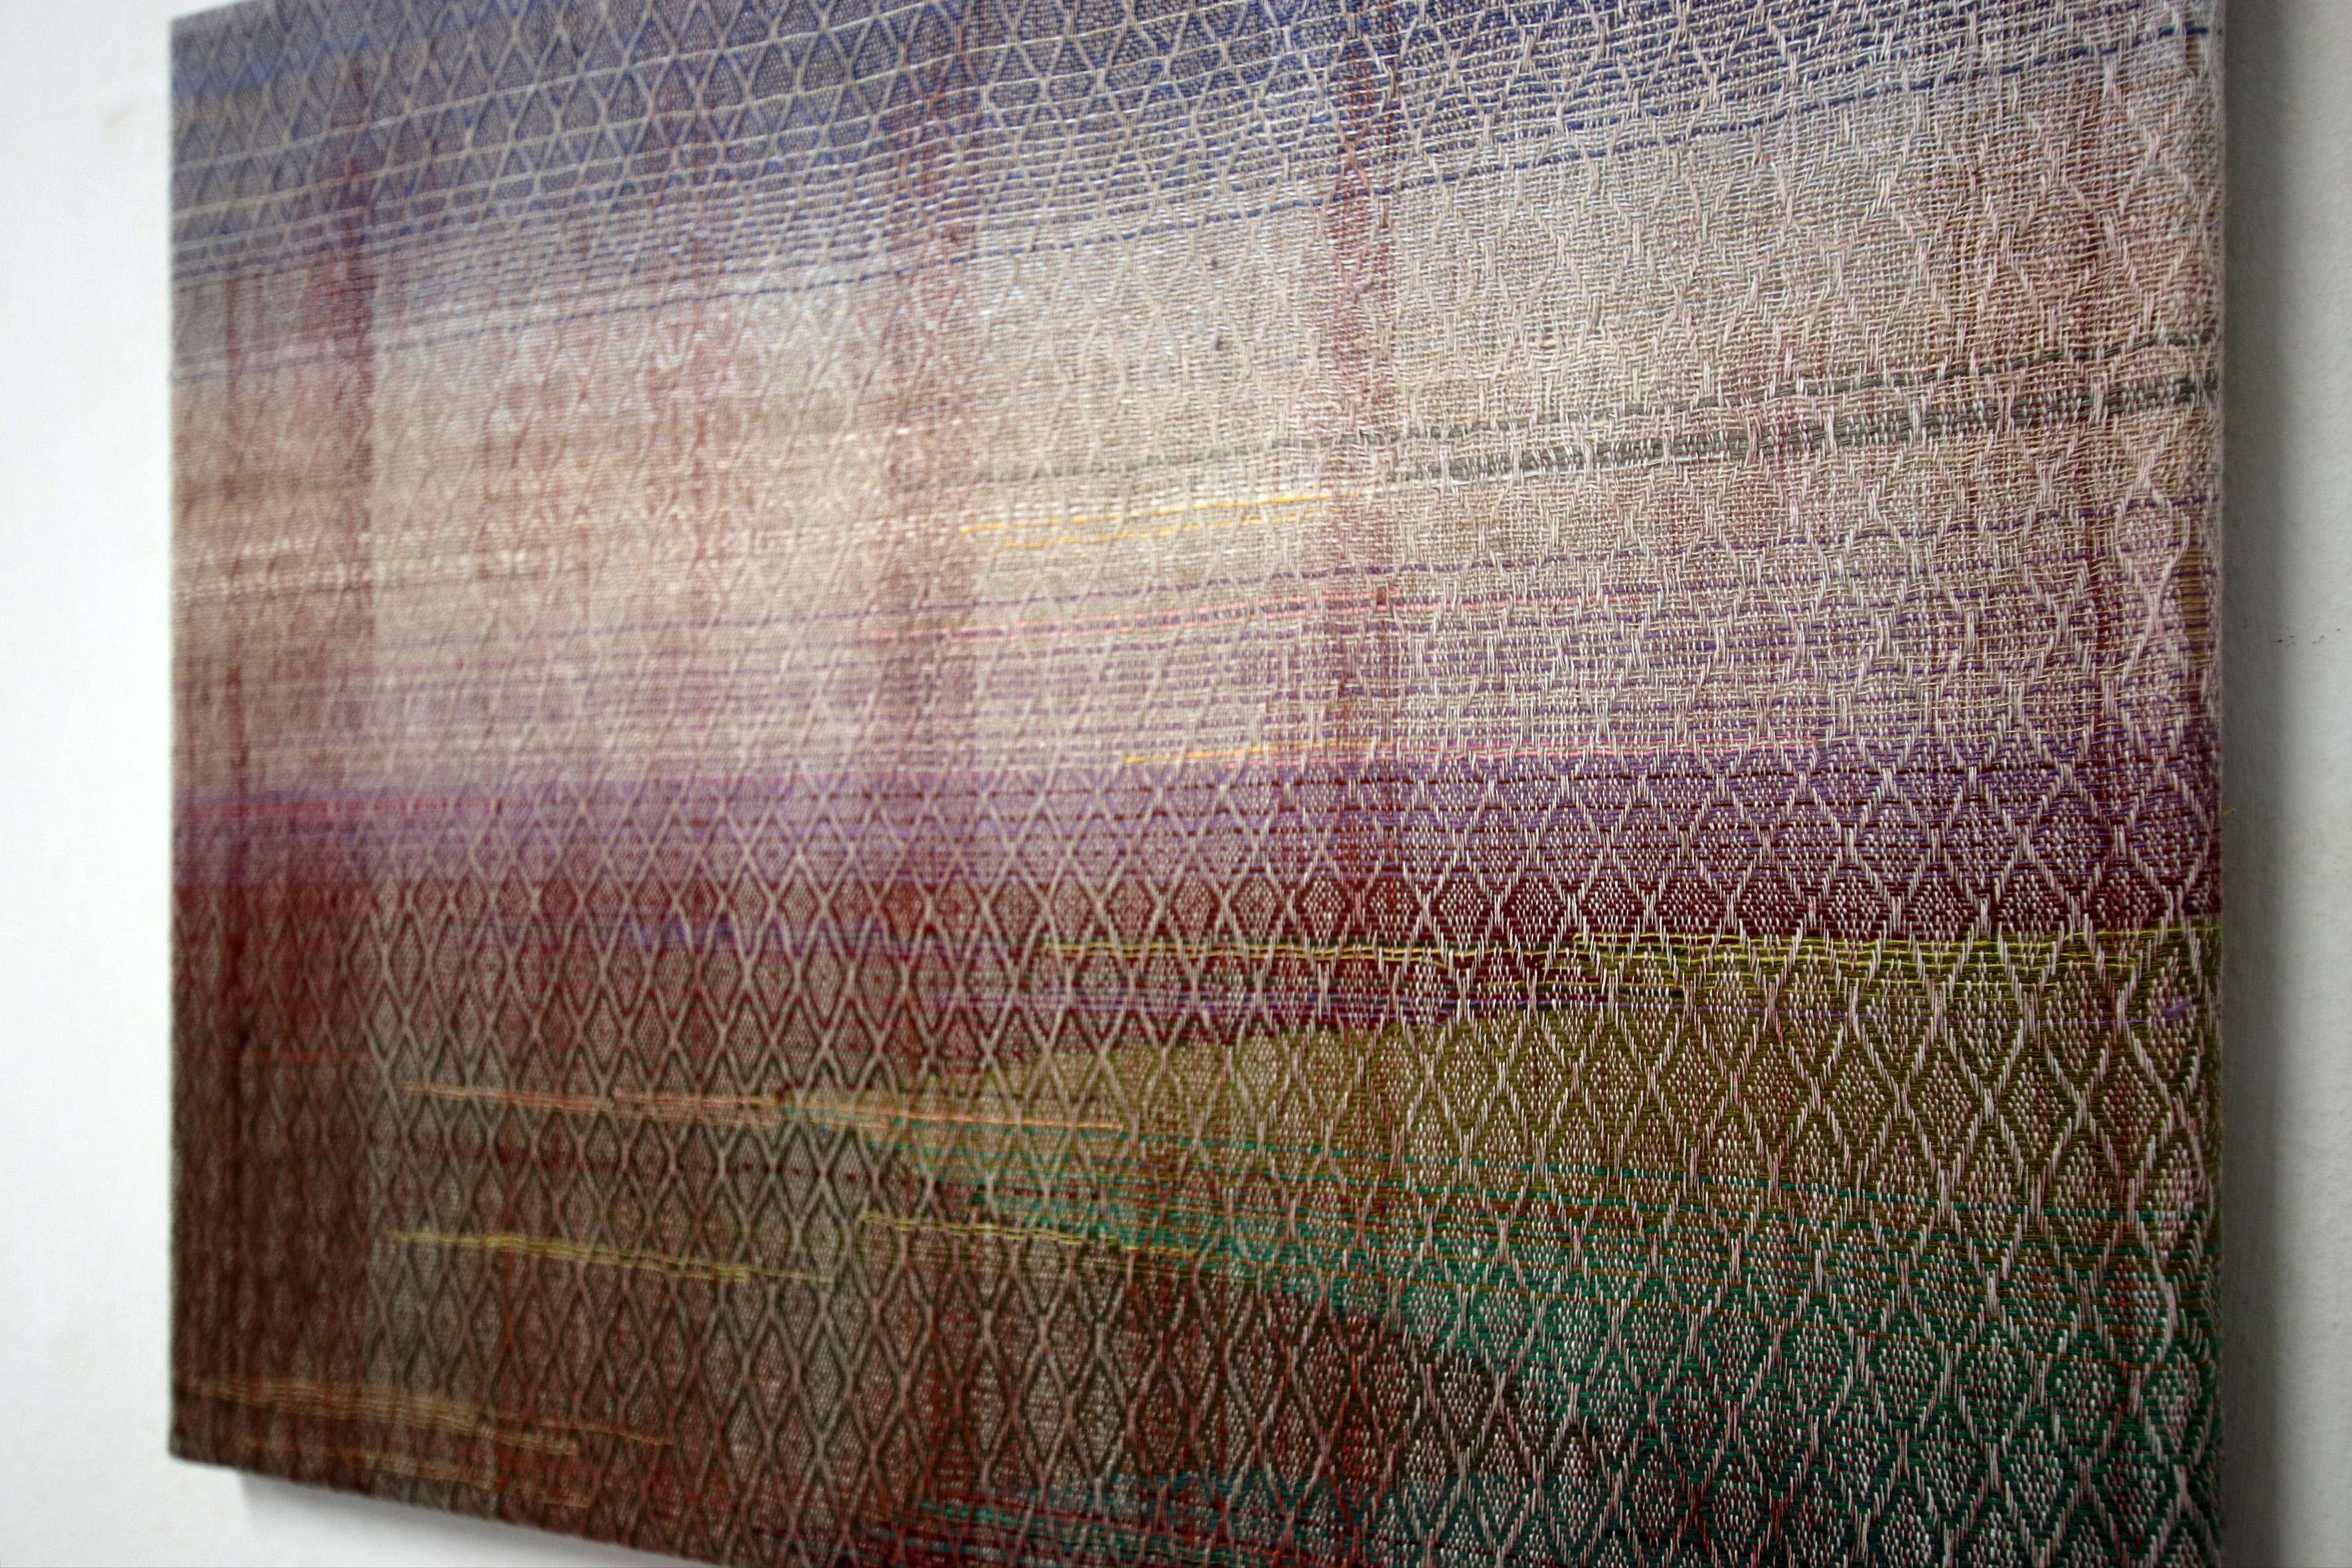 From the series Horizons – Sunset  2023
Handwoven painting, linen, cotton yarn, acrylic textile paint, 65 x 50 cm.

‘Horizons’ are a symbiosis of two disciplines of art, Painting and Weaving. Handwoven Canvas is entirely constructed on a weaving